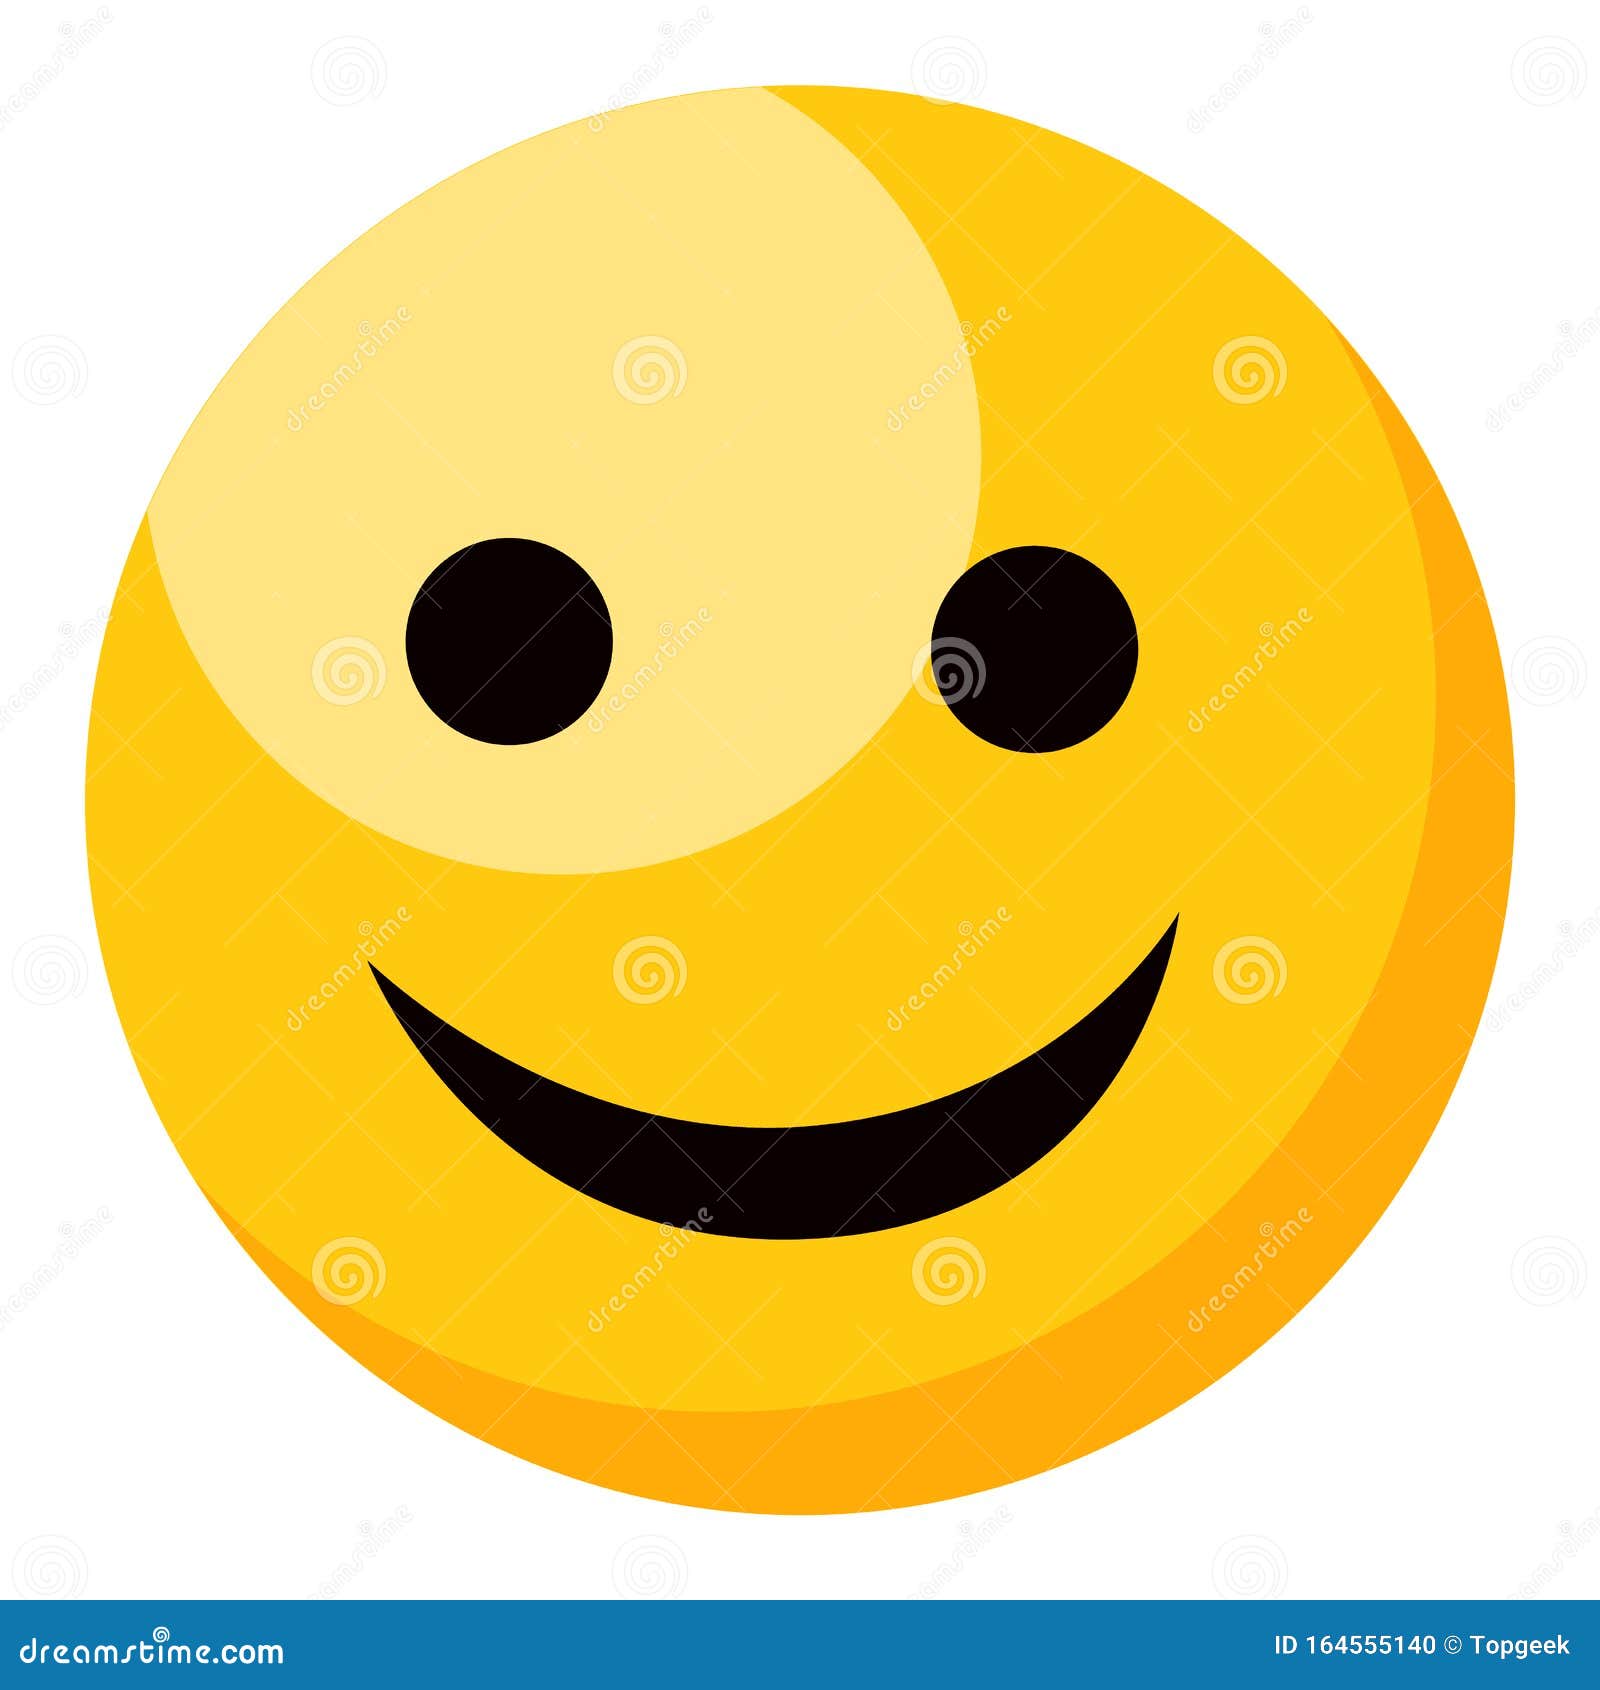 Yellow Smiling Happy Face Emoji Isolated Vector Stock Vector Illustration Of Facial Emotion